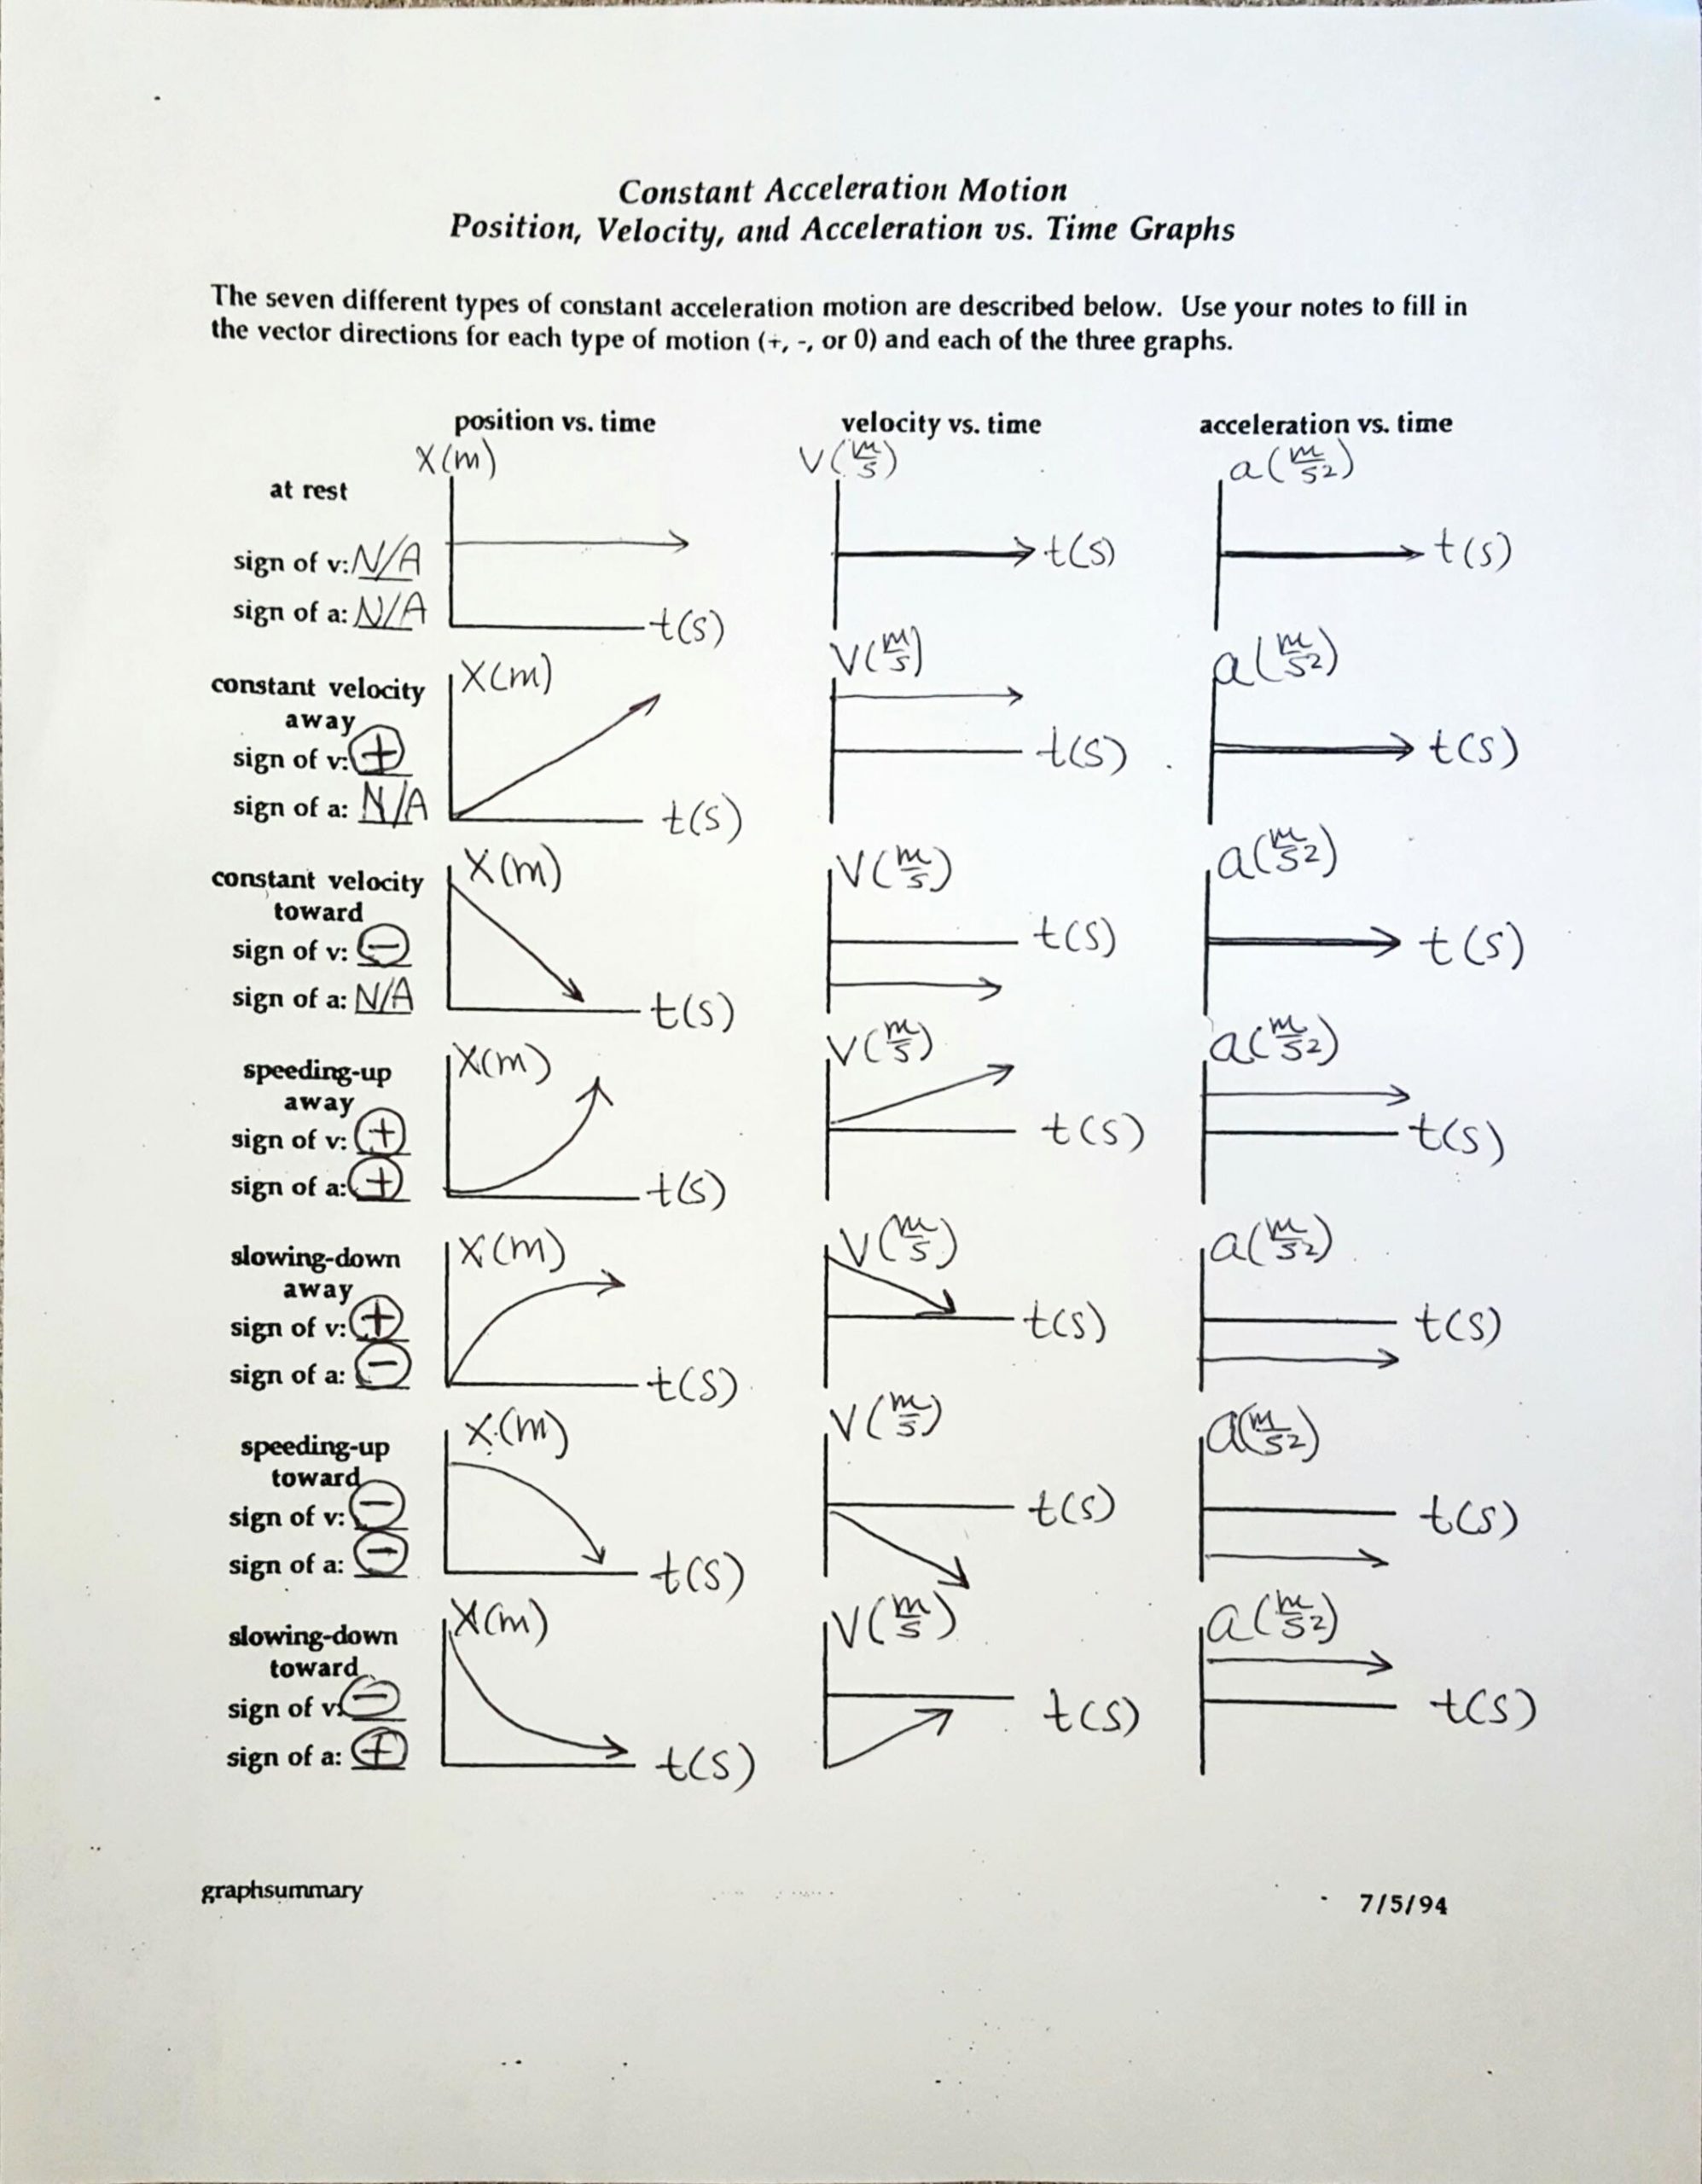 Position Time Graph Worksheet Position and Velocity Vs Time Graphs Worksheet Answers